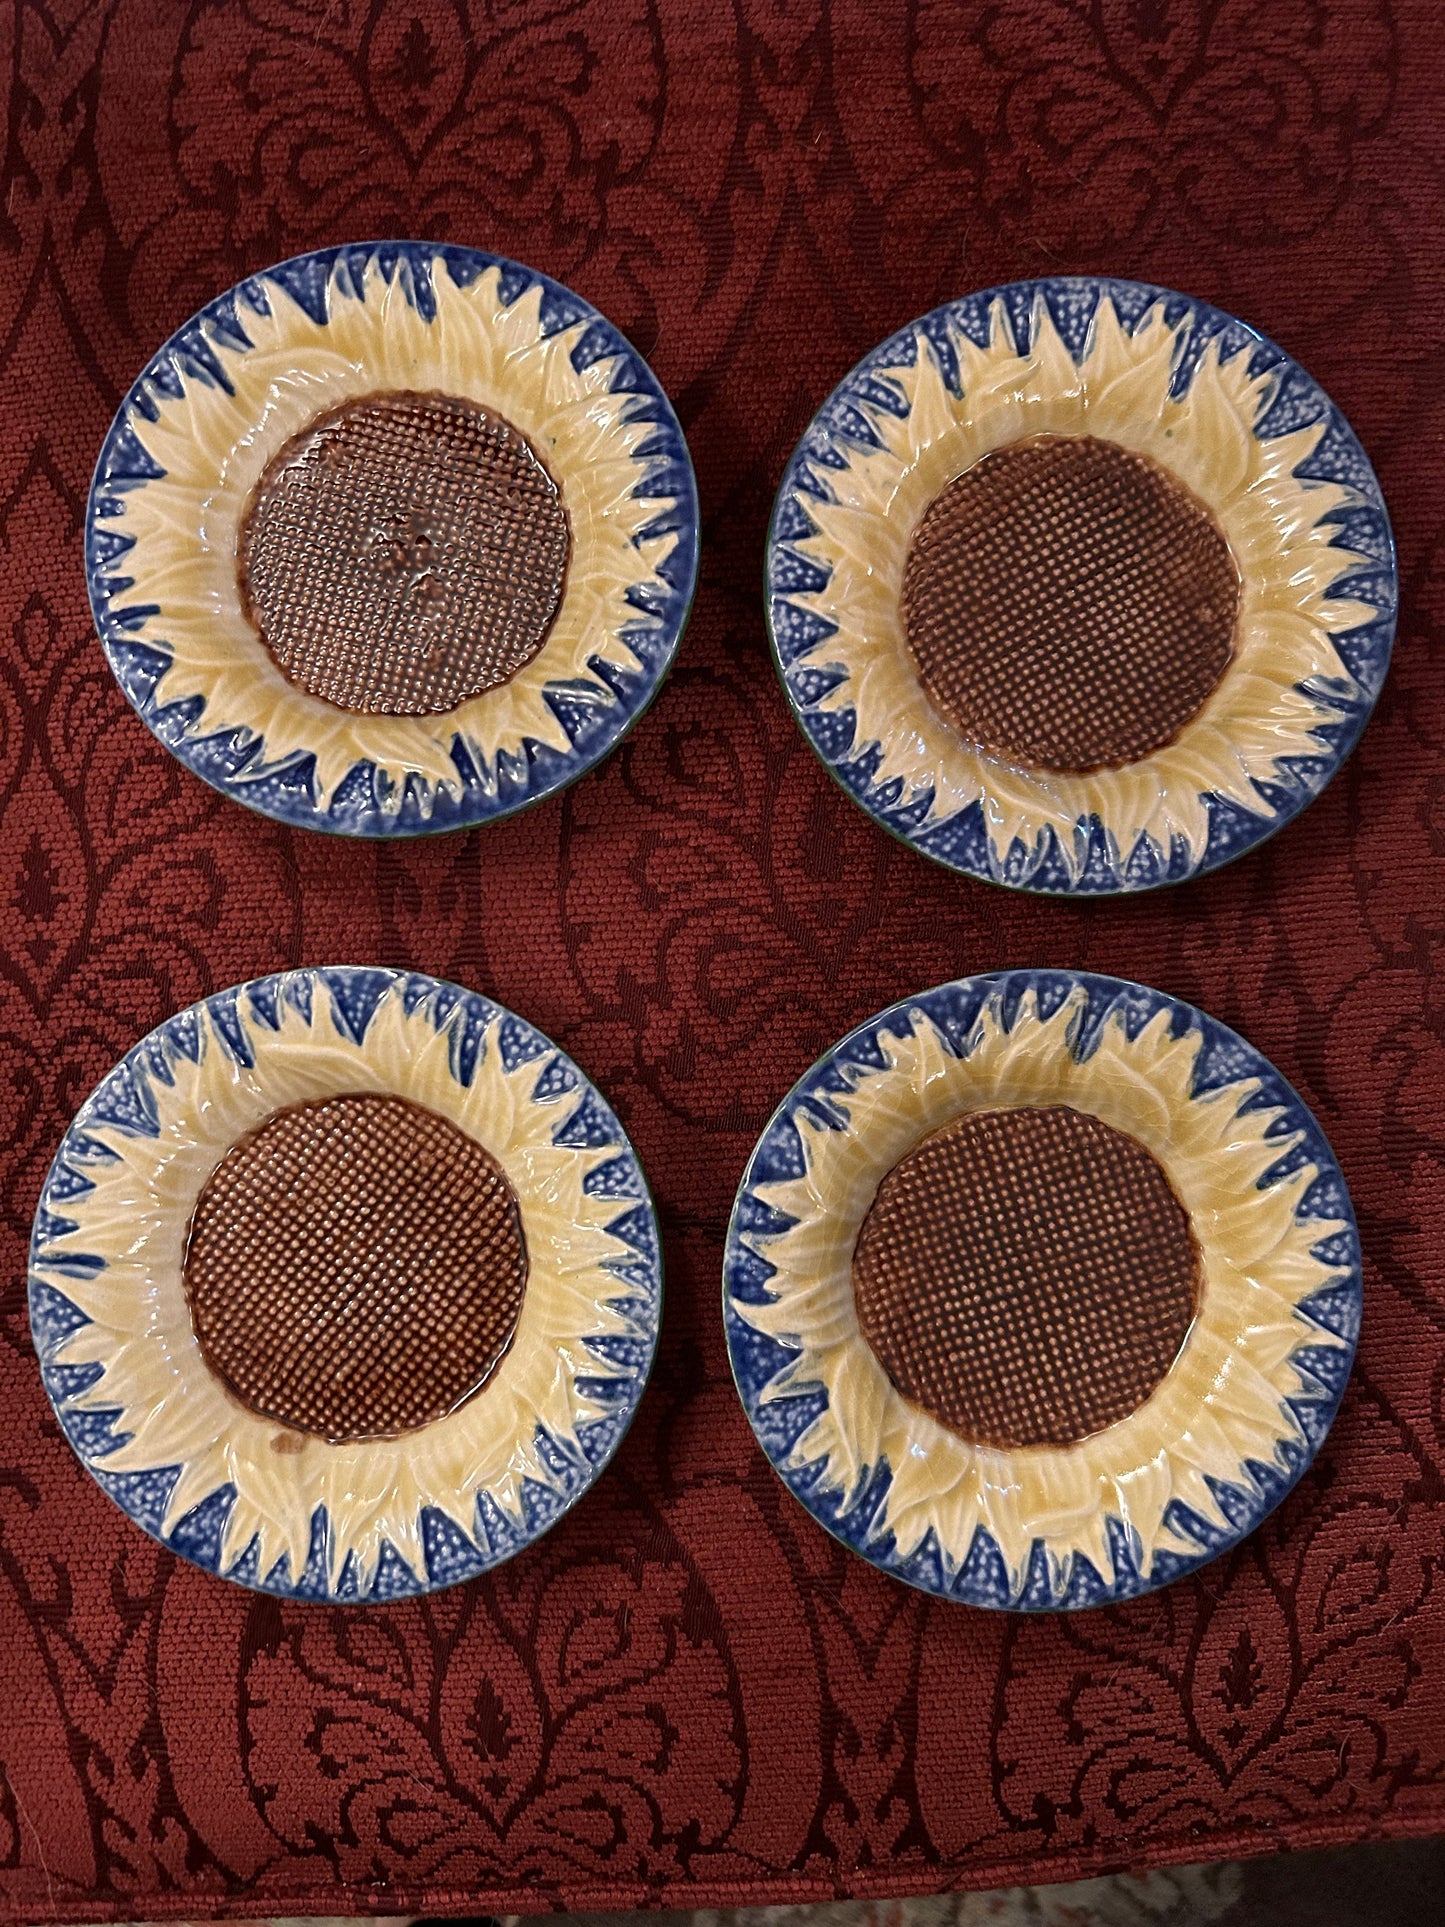 Metropolitan Museum of Art Sunflower Dishes Sold in Pairs 6 pairs are available